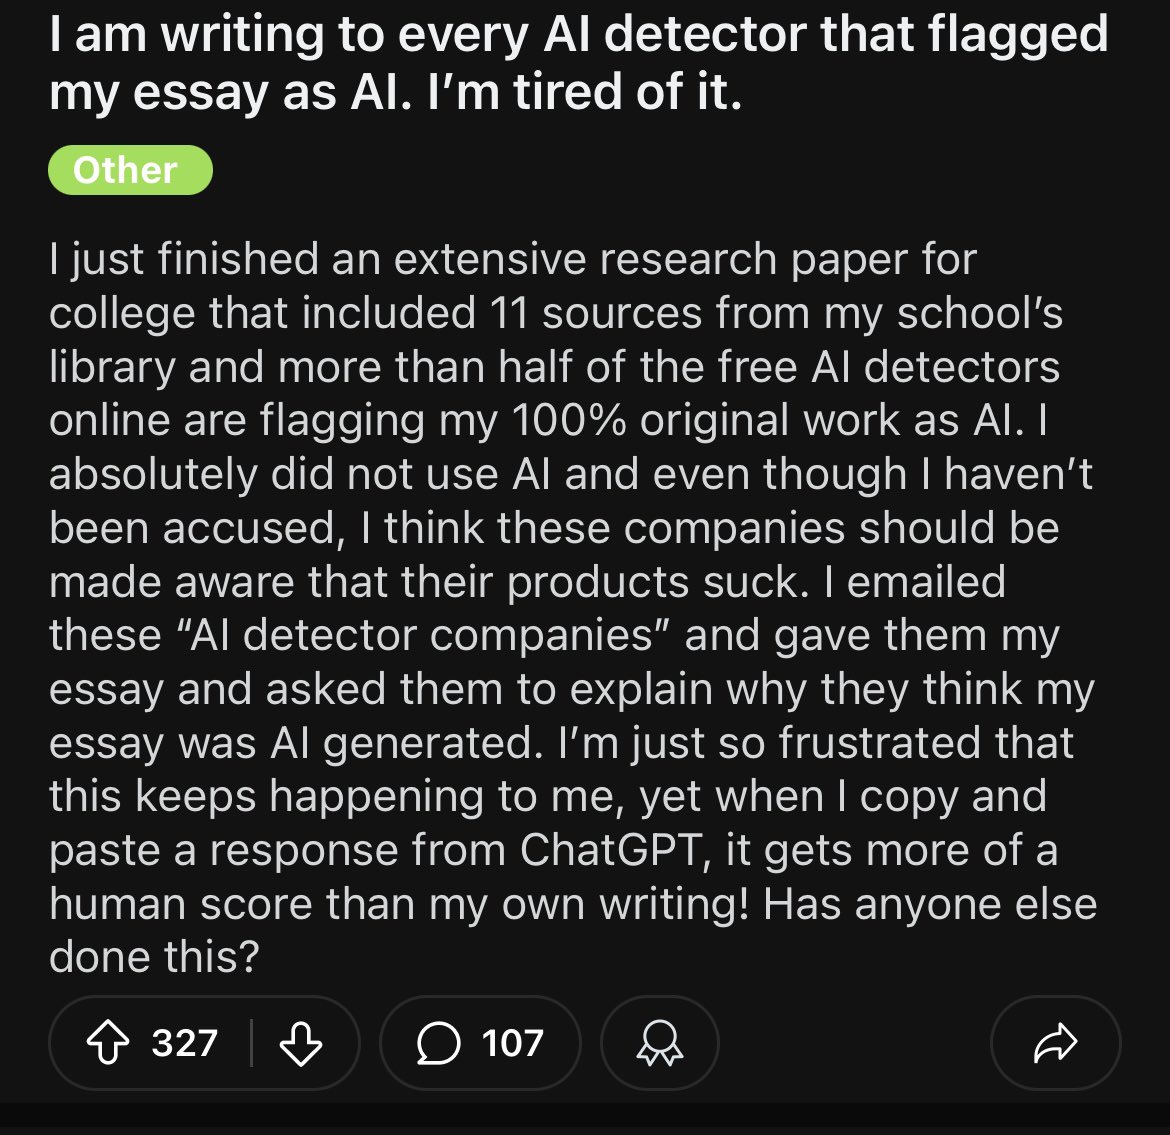 AI detectors feel like total scams - sad that students have to deal with this